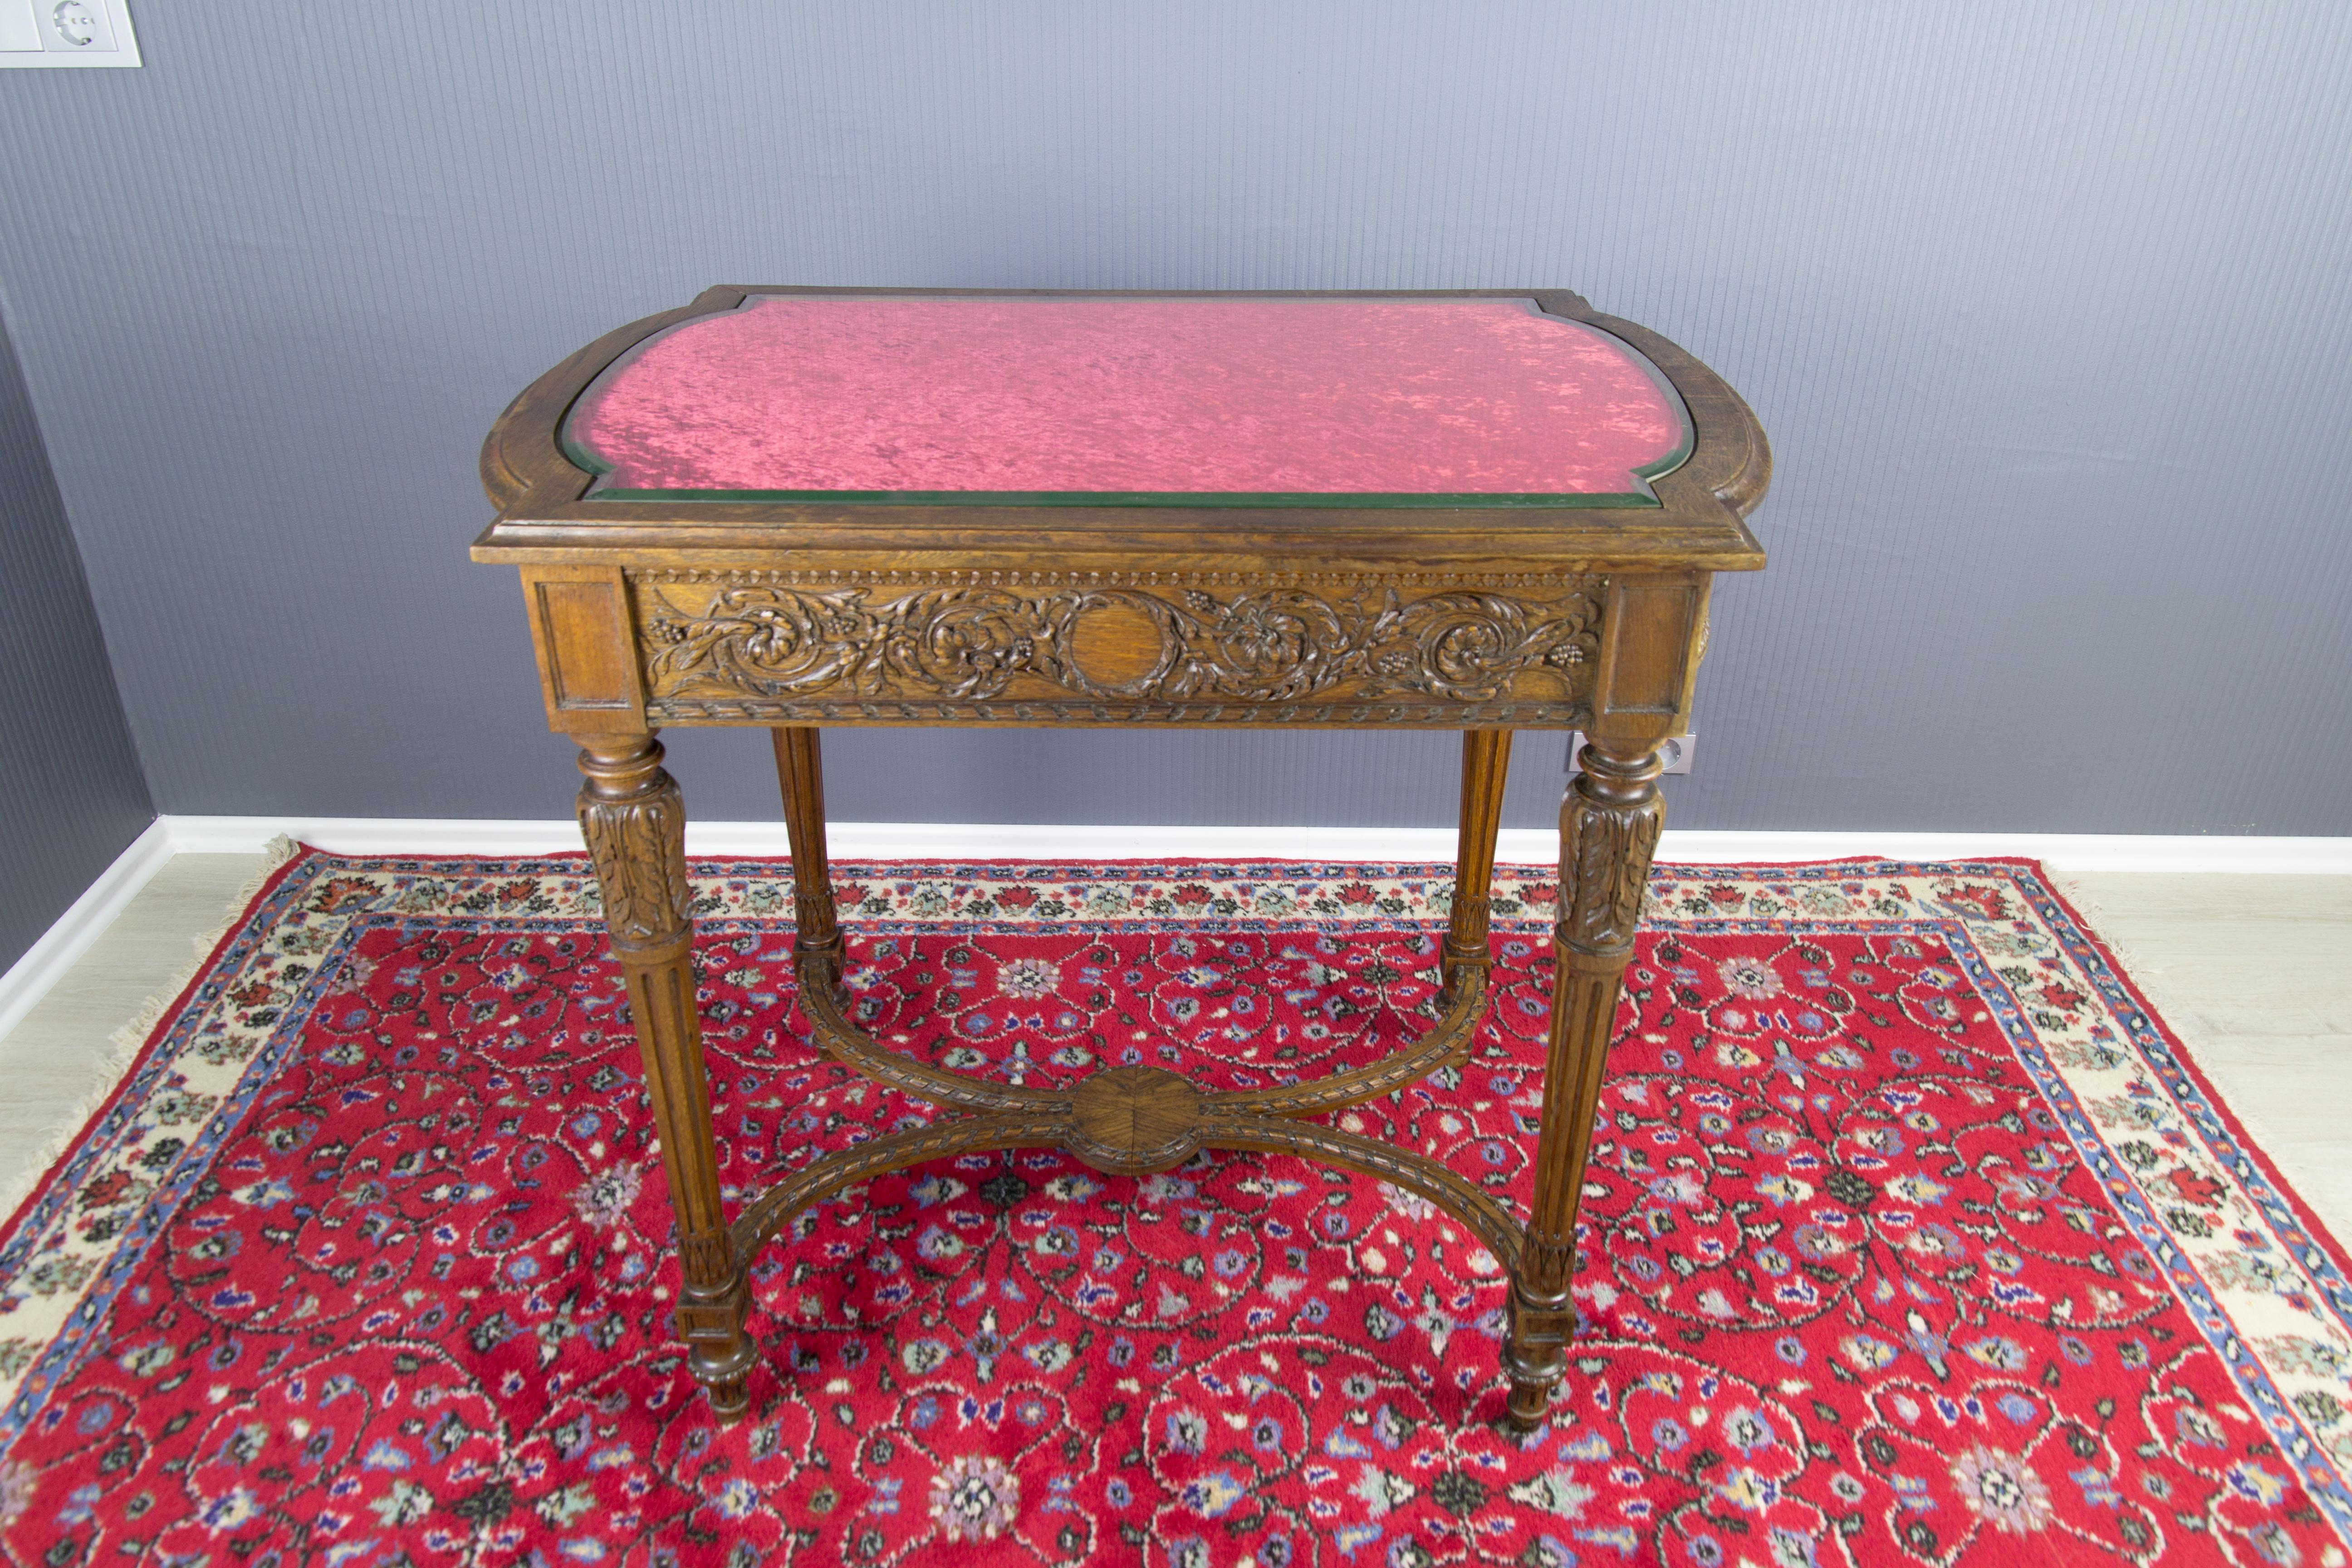 French late 19th century Louis XVI style center table.
A beautiful Louis XVI-style center table made of walnut wood with delicate floral and leaf carvings. The beveled glass top and burgundy fabric under it are shaped to fit the walnut top base. In